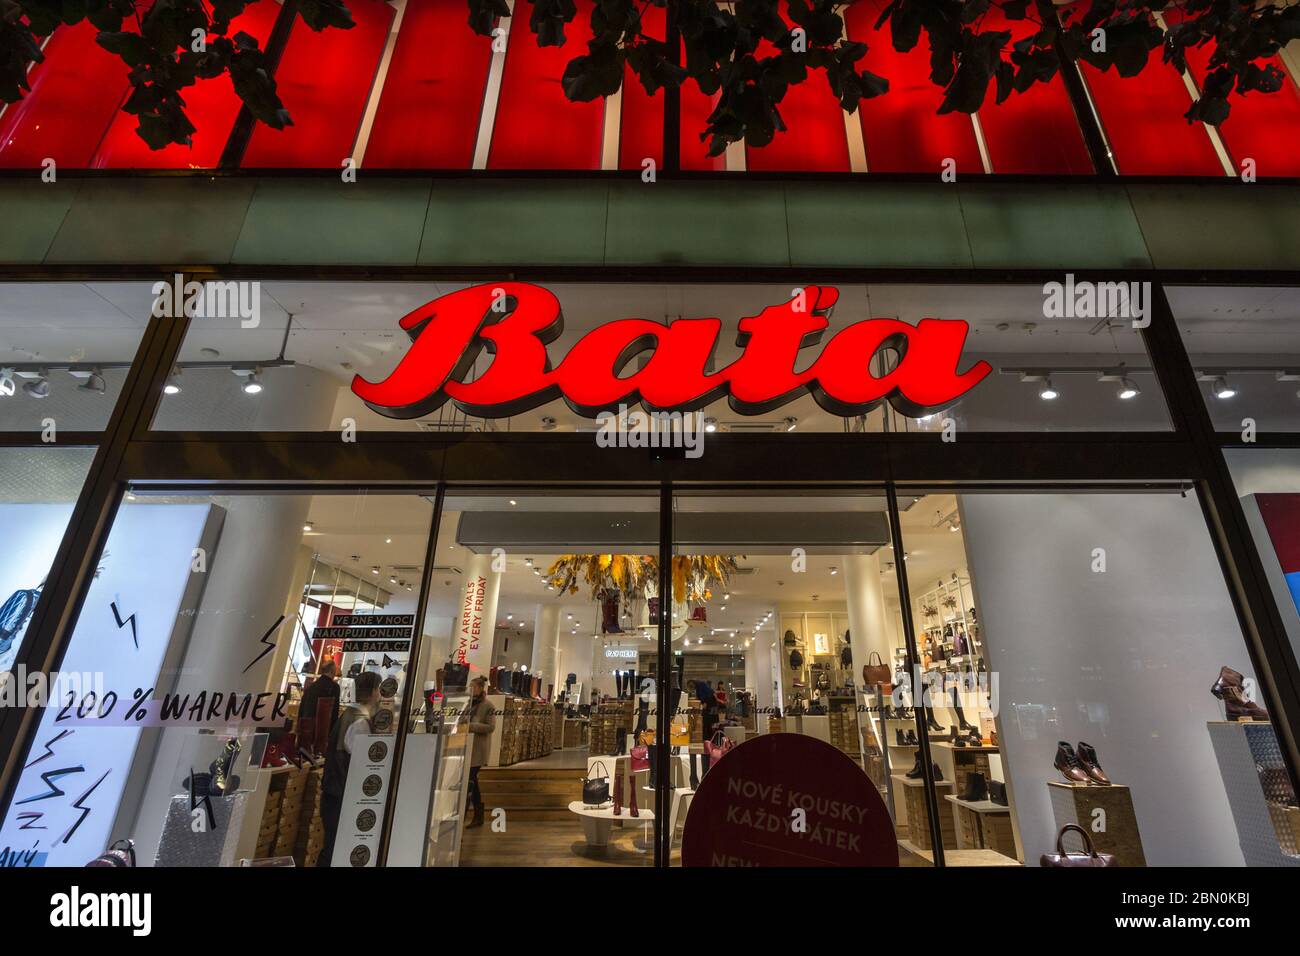 PRAGUE, CZECHIA - OCTOBER 31, 2019: Bata Shoes sign in front of their local shop in Prague. Bata is a shoes and footwear manufacturer and retailer fro Stock Photo